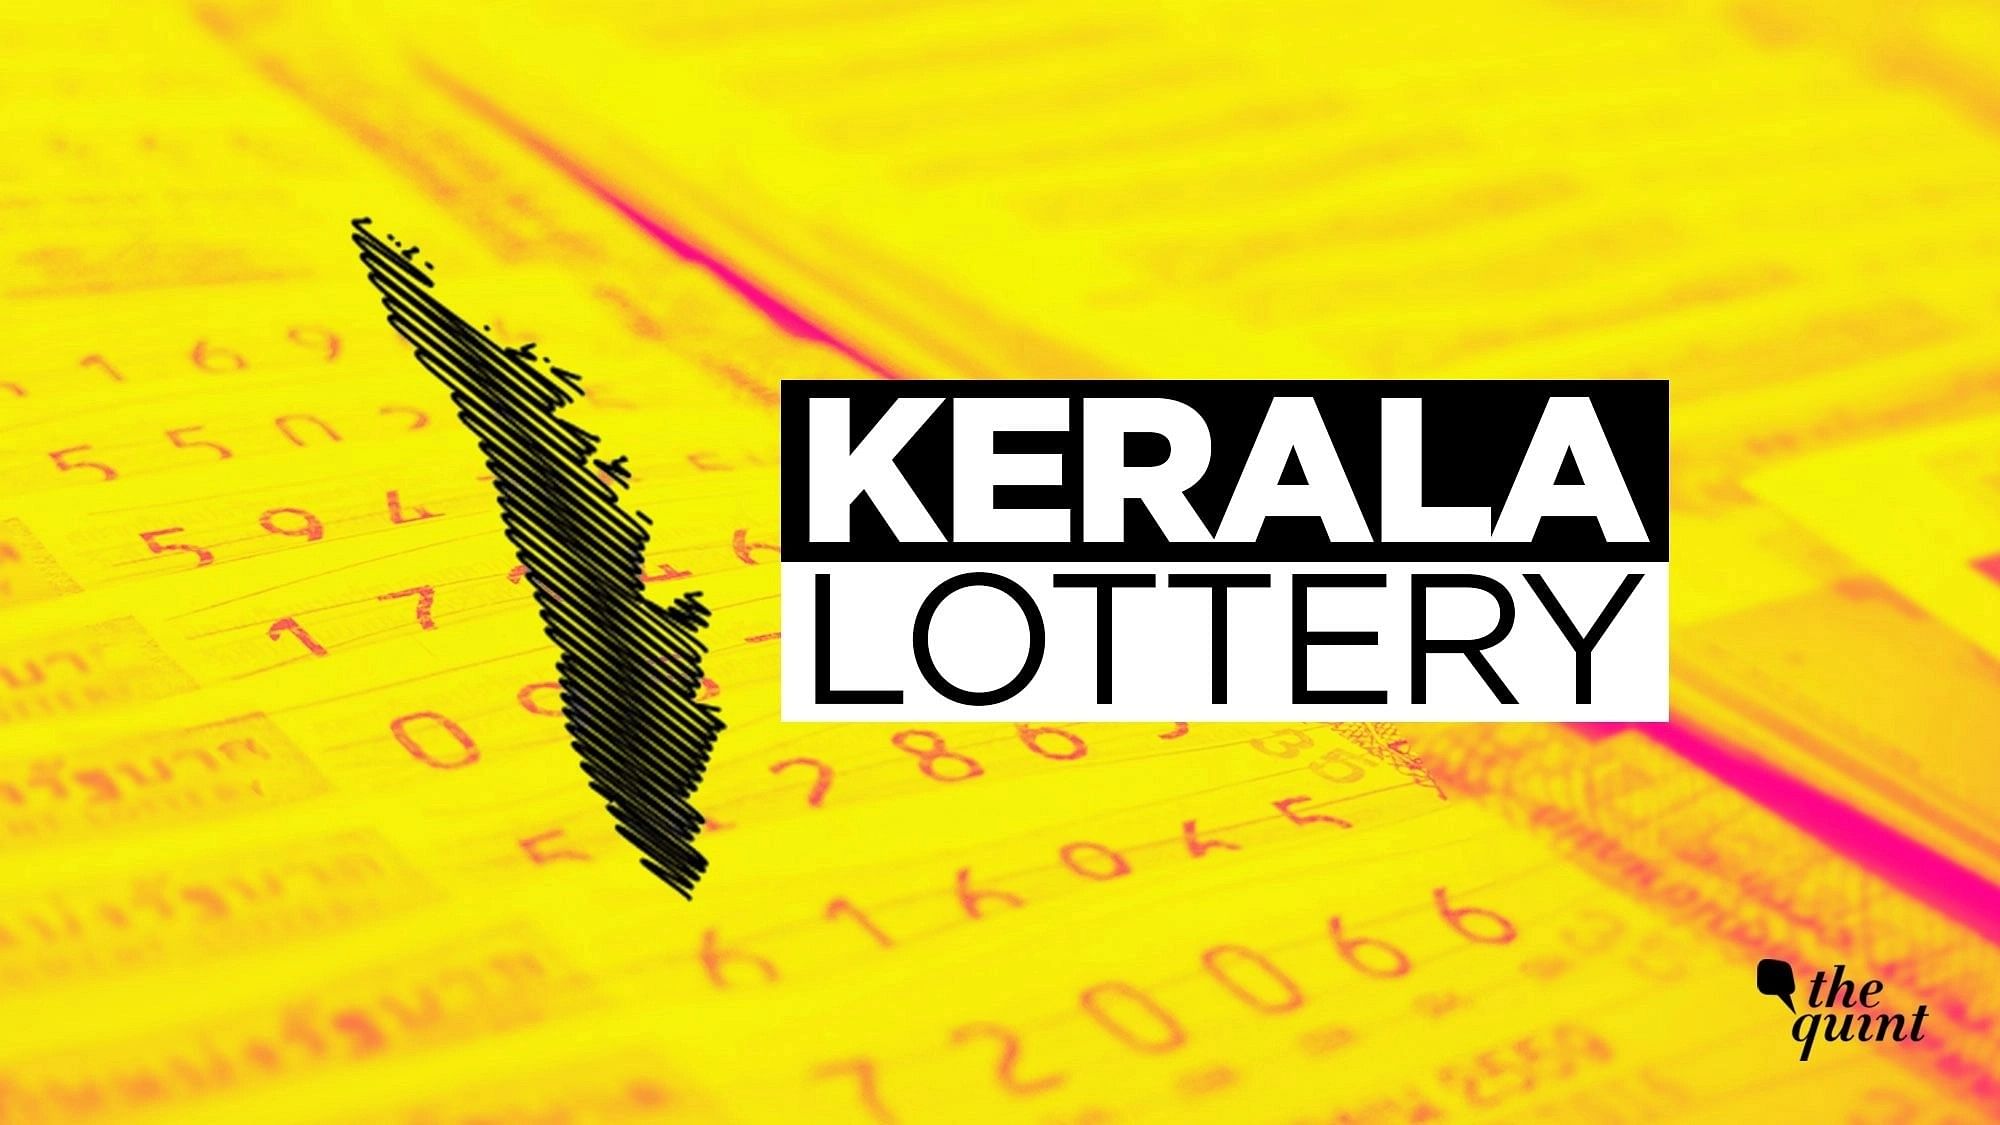 <div class="paragraphs"><p>The&nbsp;Kerala Lottery&nbsp;Win Win W 750 prize money details are listed below.</p></div>